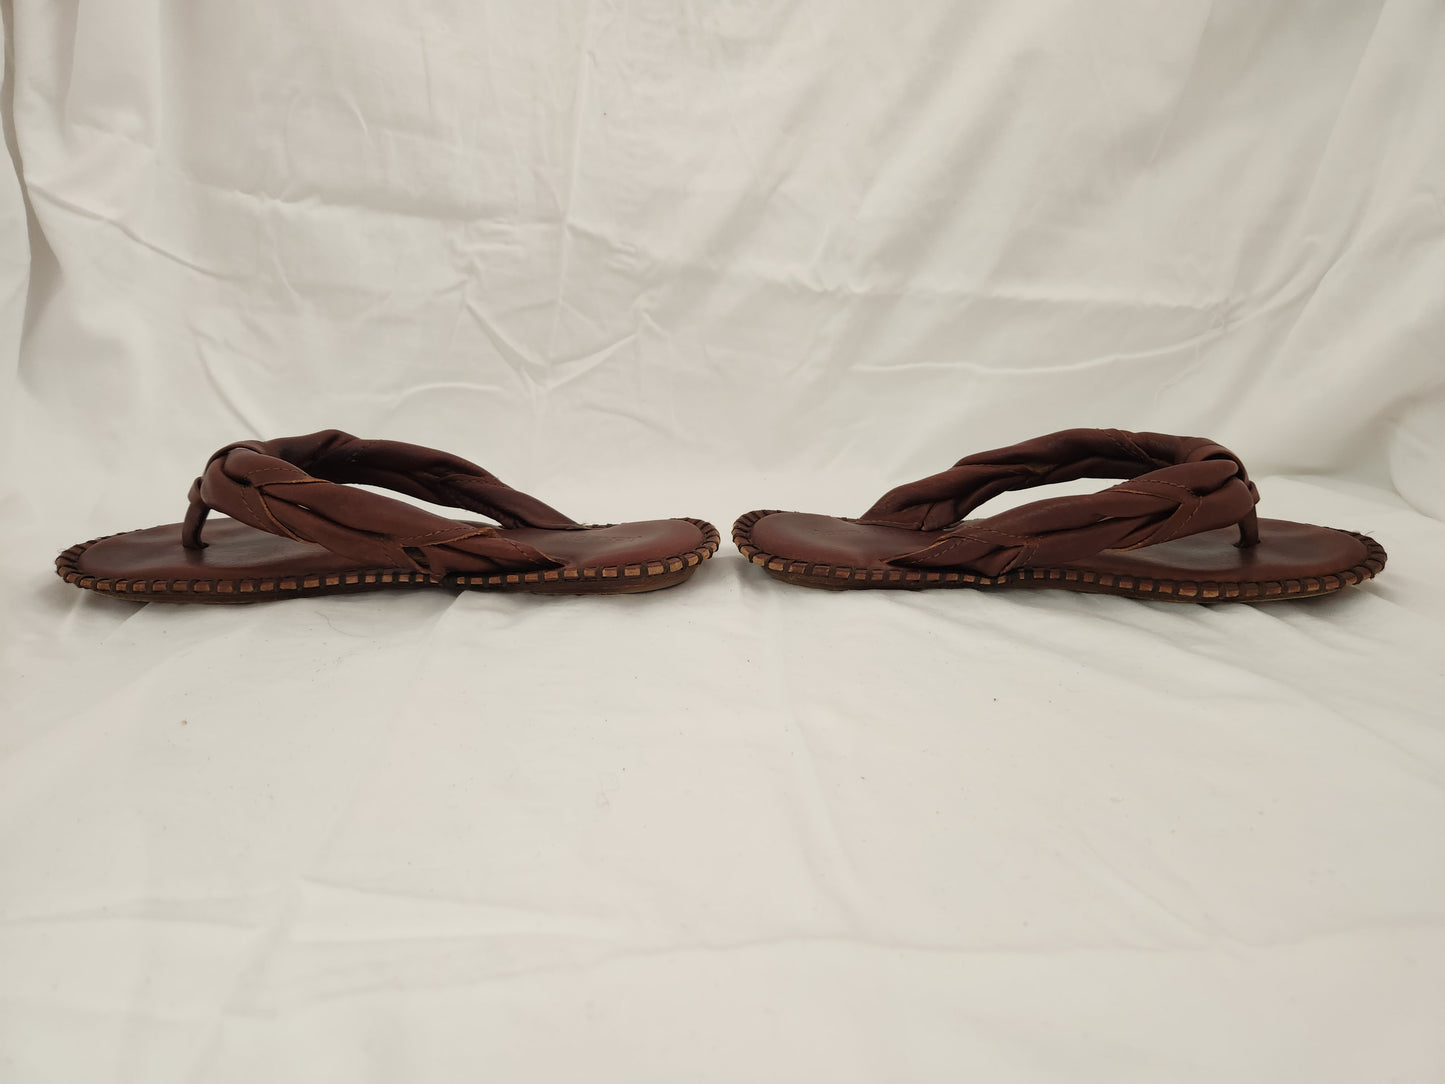 Acne Studios Chestnut Brown Leather Thong Flat Sandal - Size: 40 (US 8.5/9)